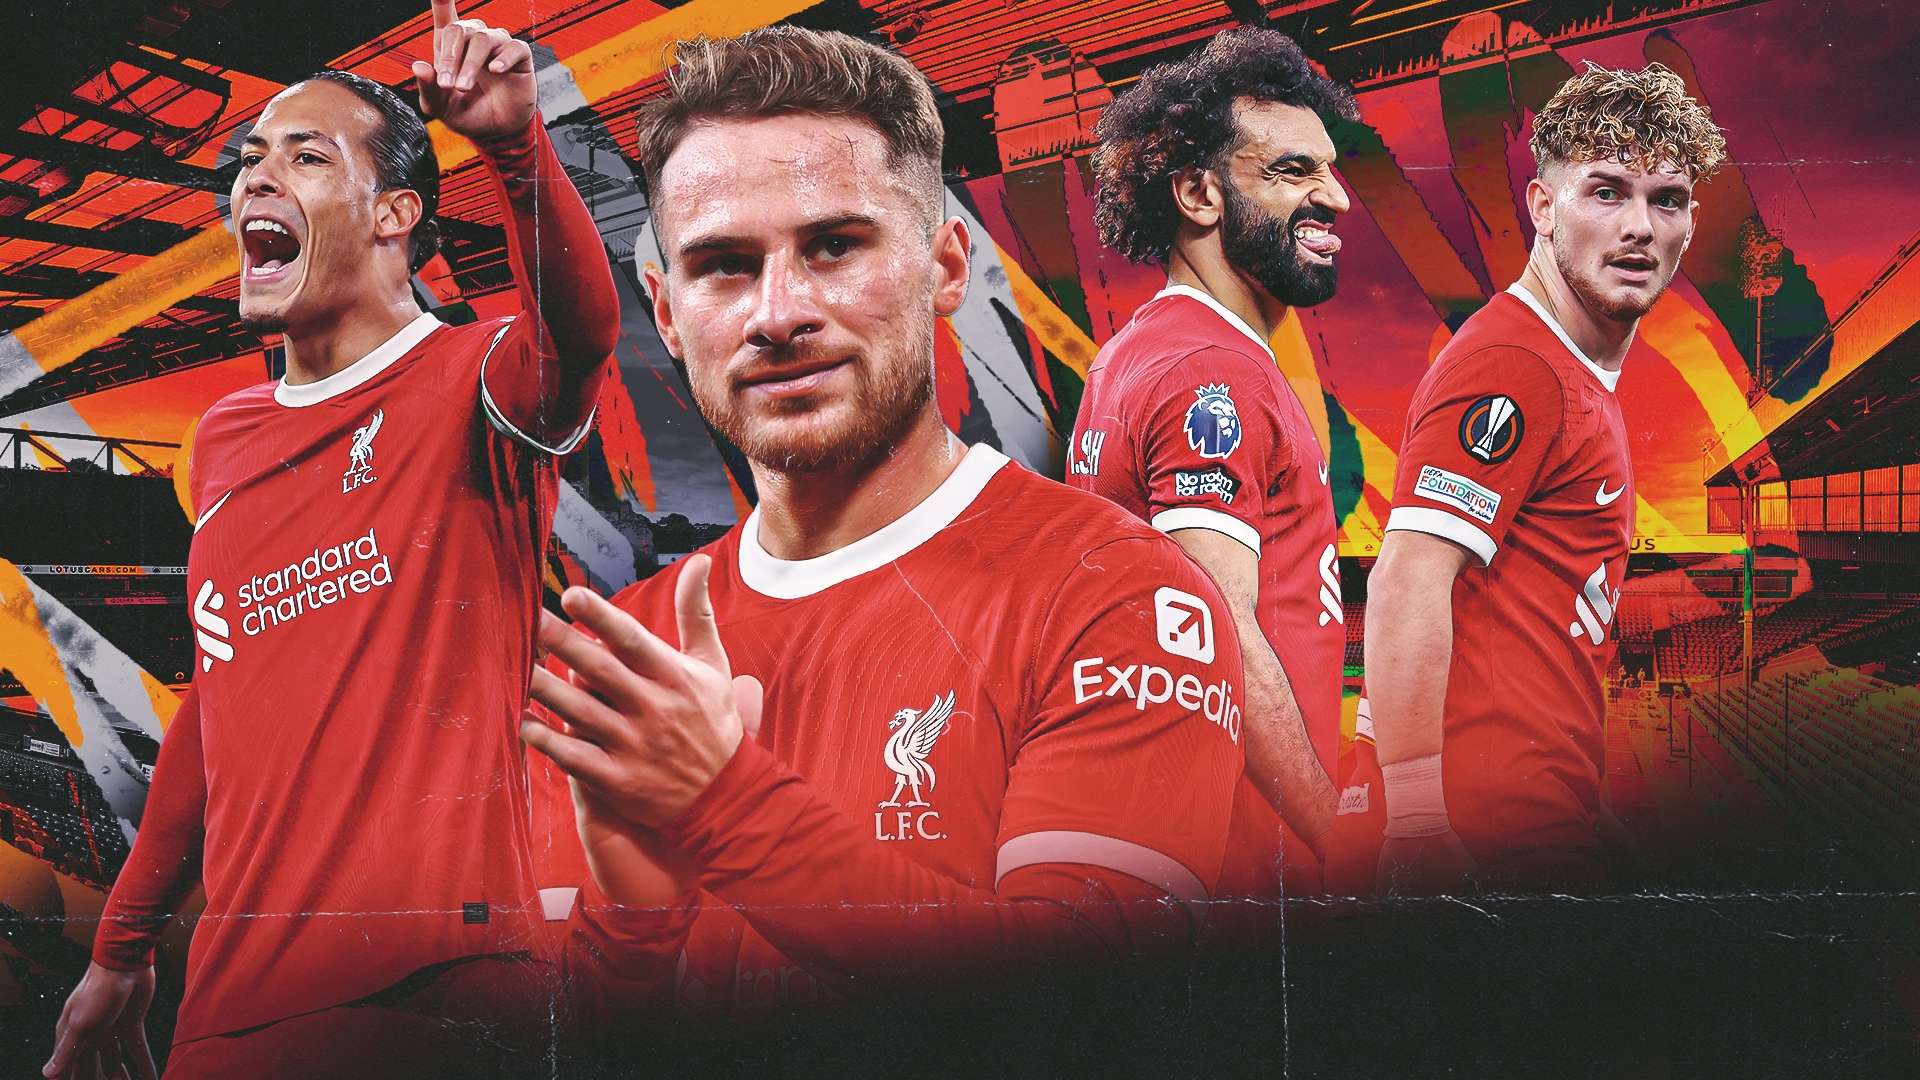 Liverpool Player of the Year GFX